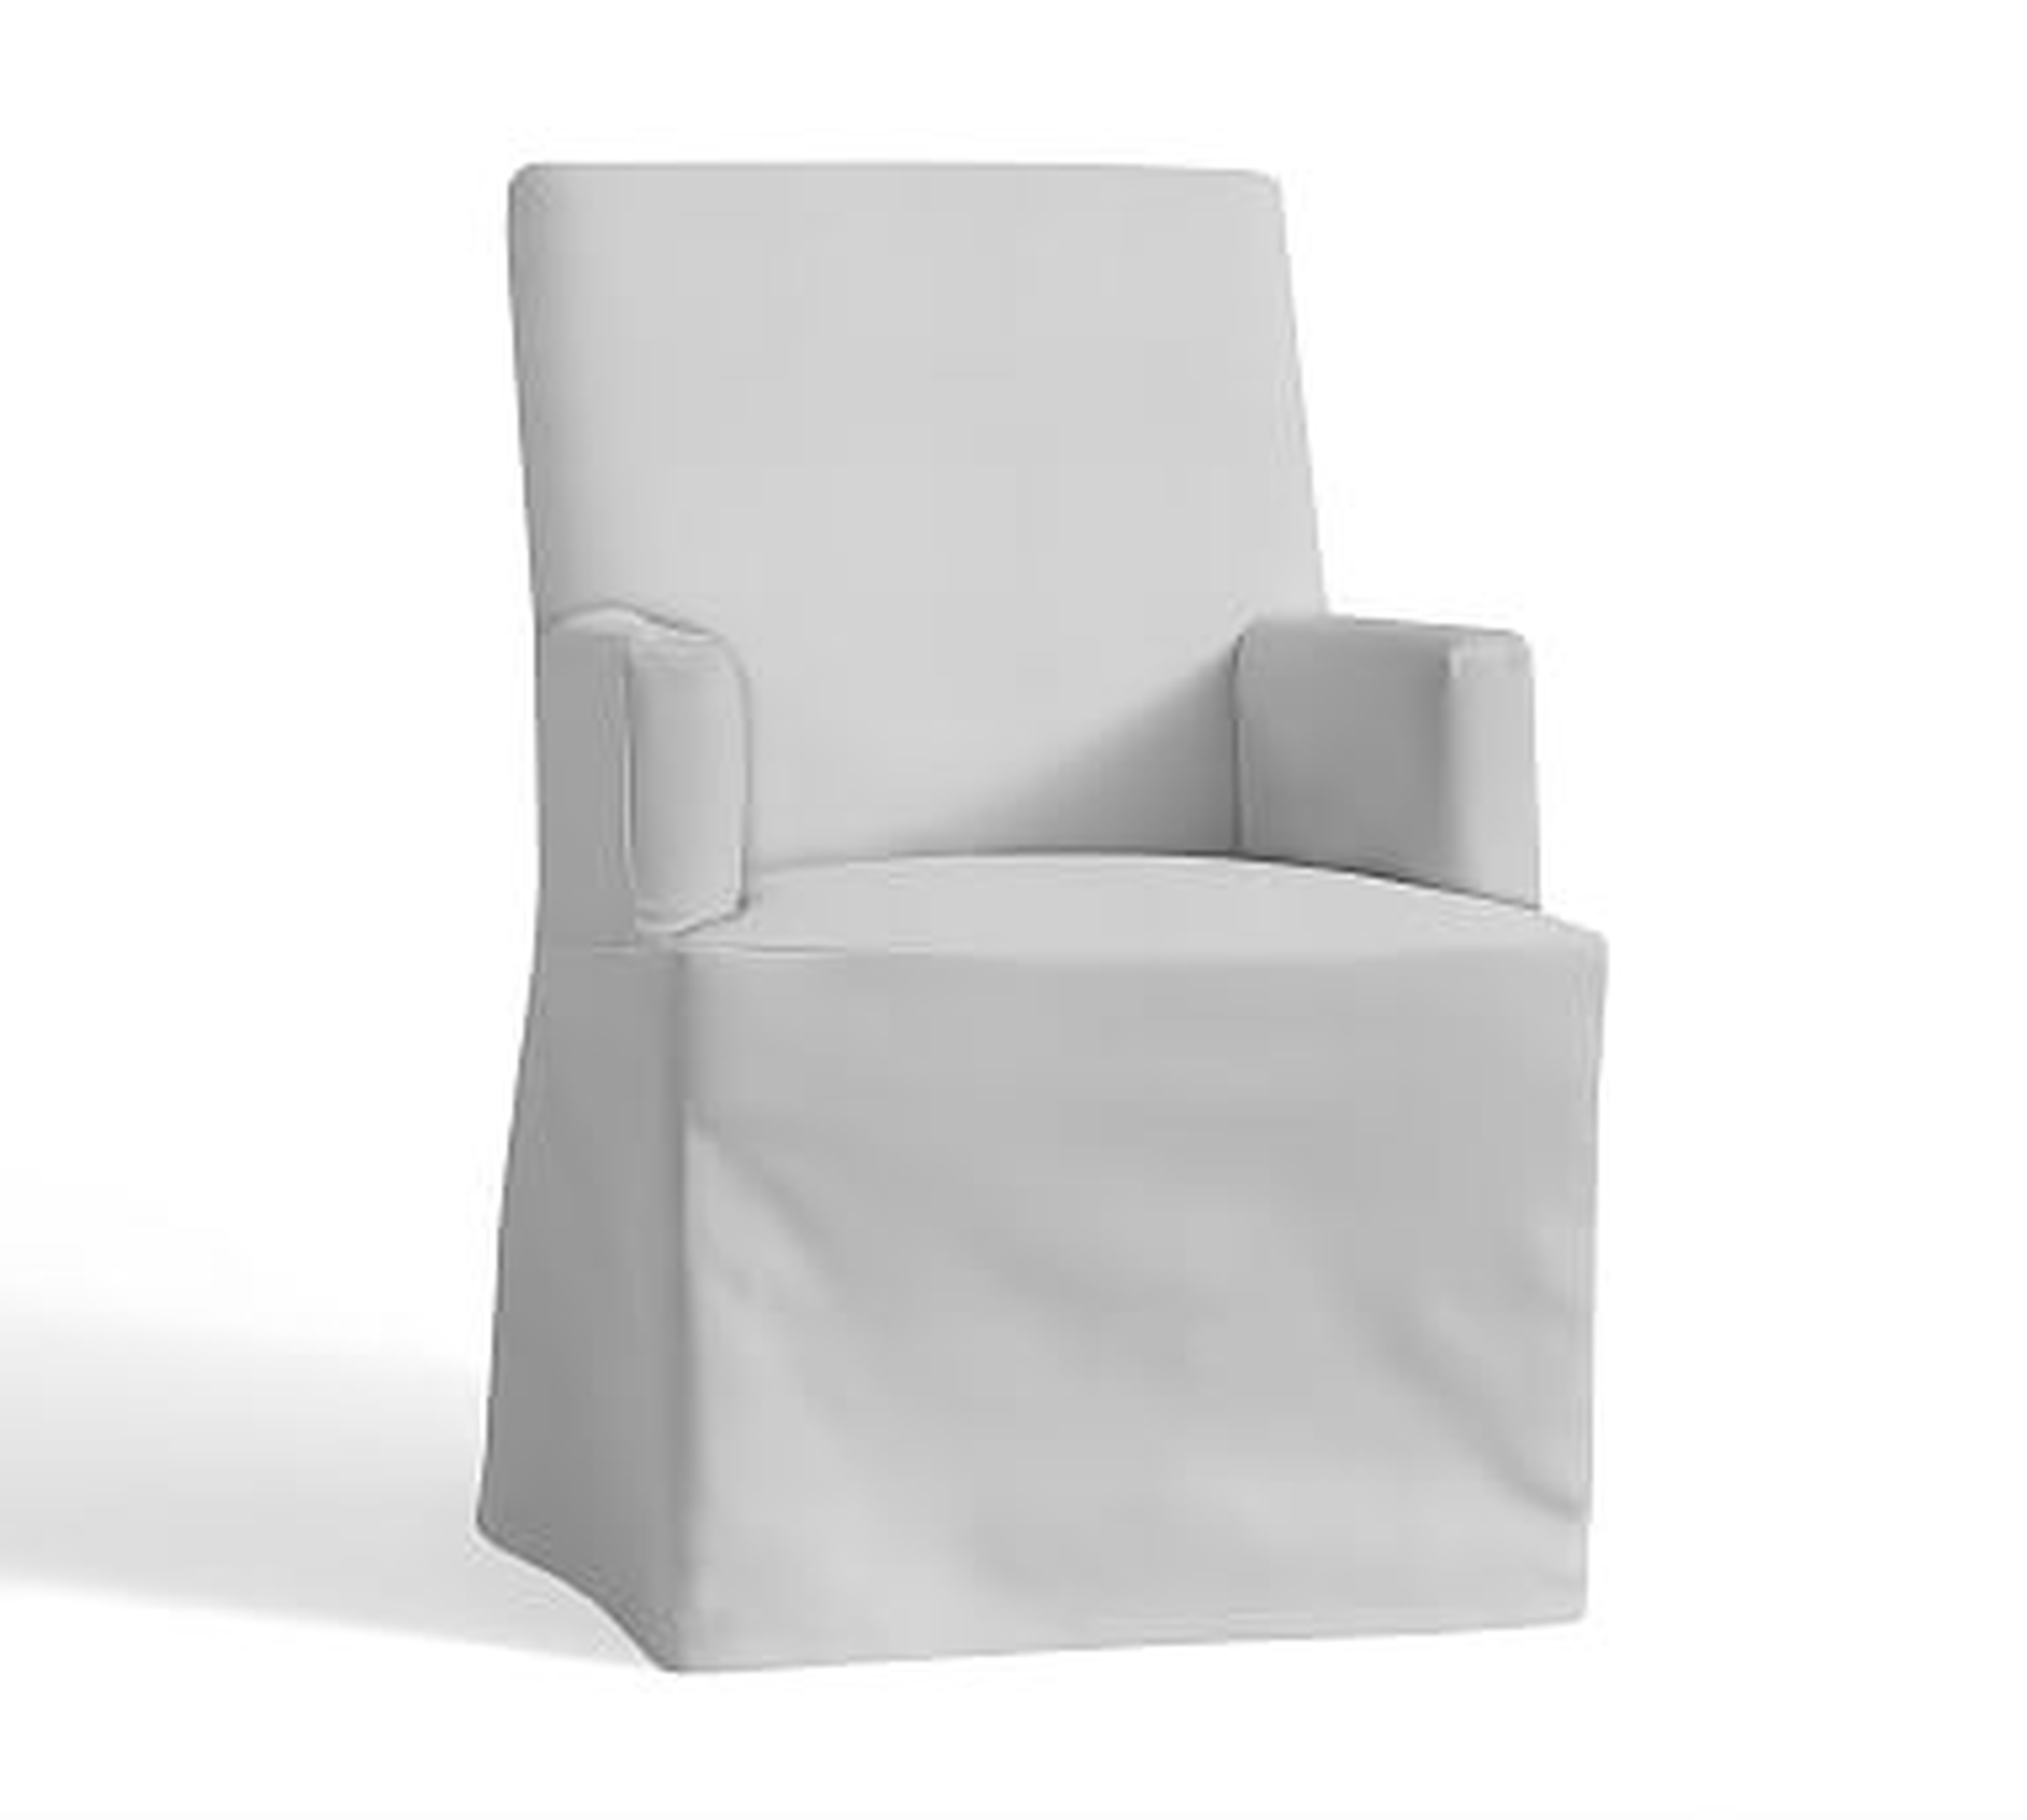 PB Comfort Square Slipcovered Dining Arm Chair, Performance Twill Warm White - Pottery Barn